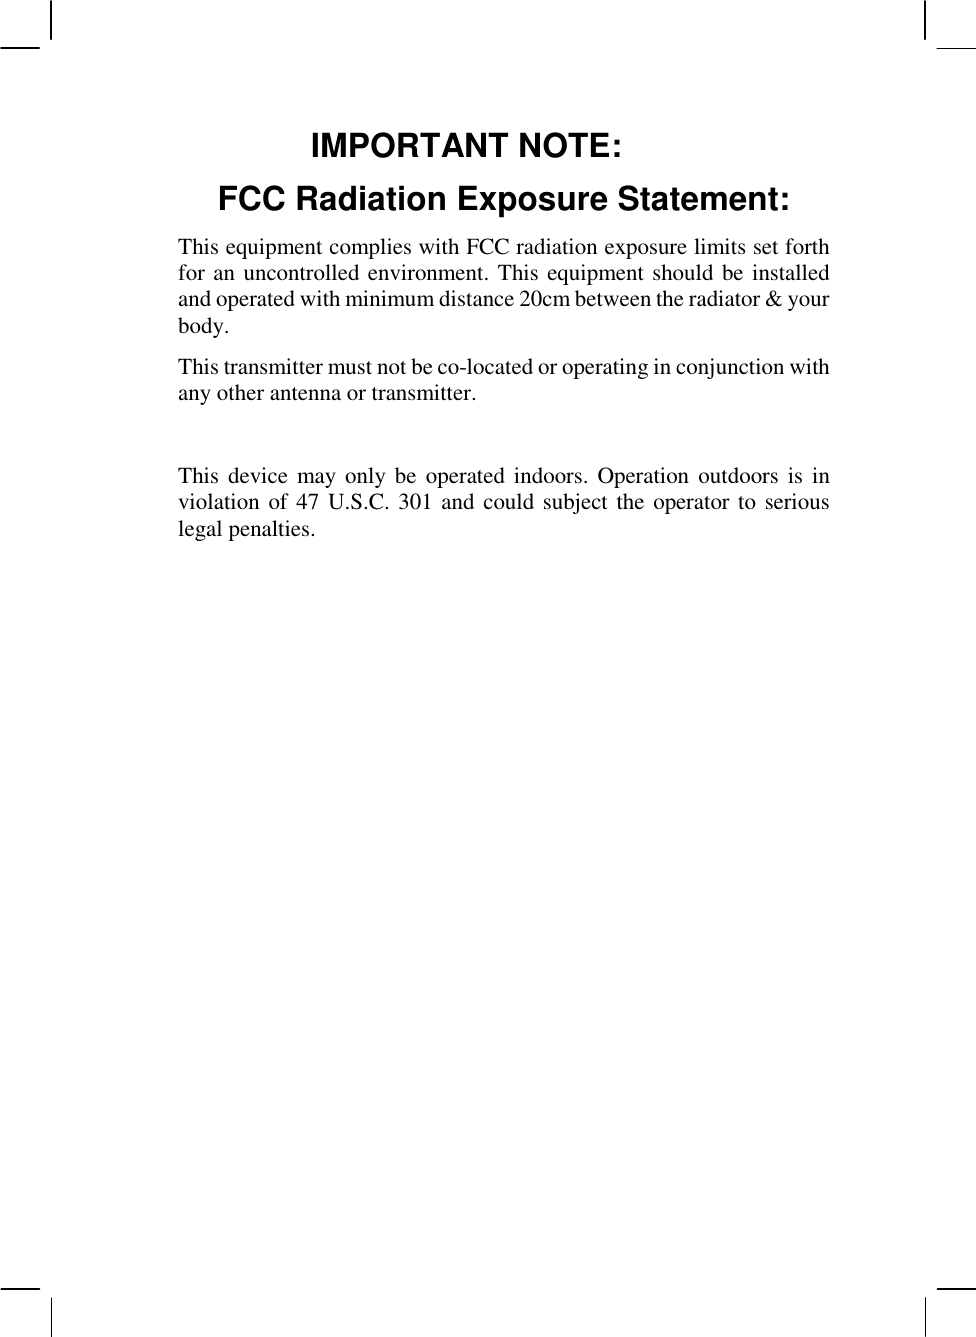   IMPORTANT NOTE: FCC Radiation Exposure Statement: This equipment complies with FCC radiation exposure limits set forth for an uncontrolled environment. This equipment should be installed and operated with minimum distance 20cm between the radiator &amp; your body. This transmitter must not be co-located or operating in conjunction with any other antenna or transmitter.  This device may only be  operated indoors. Operation outdoors  is in violation of 47 U.S.C. 301 and could subject the operator to serious legal penalties.                